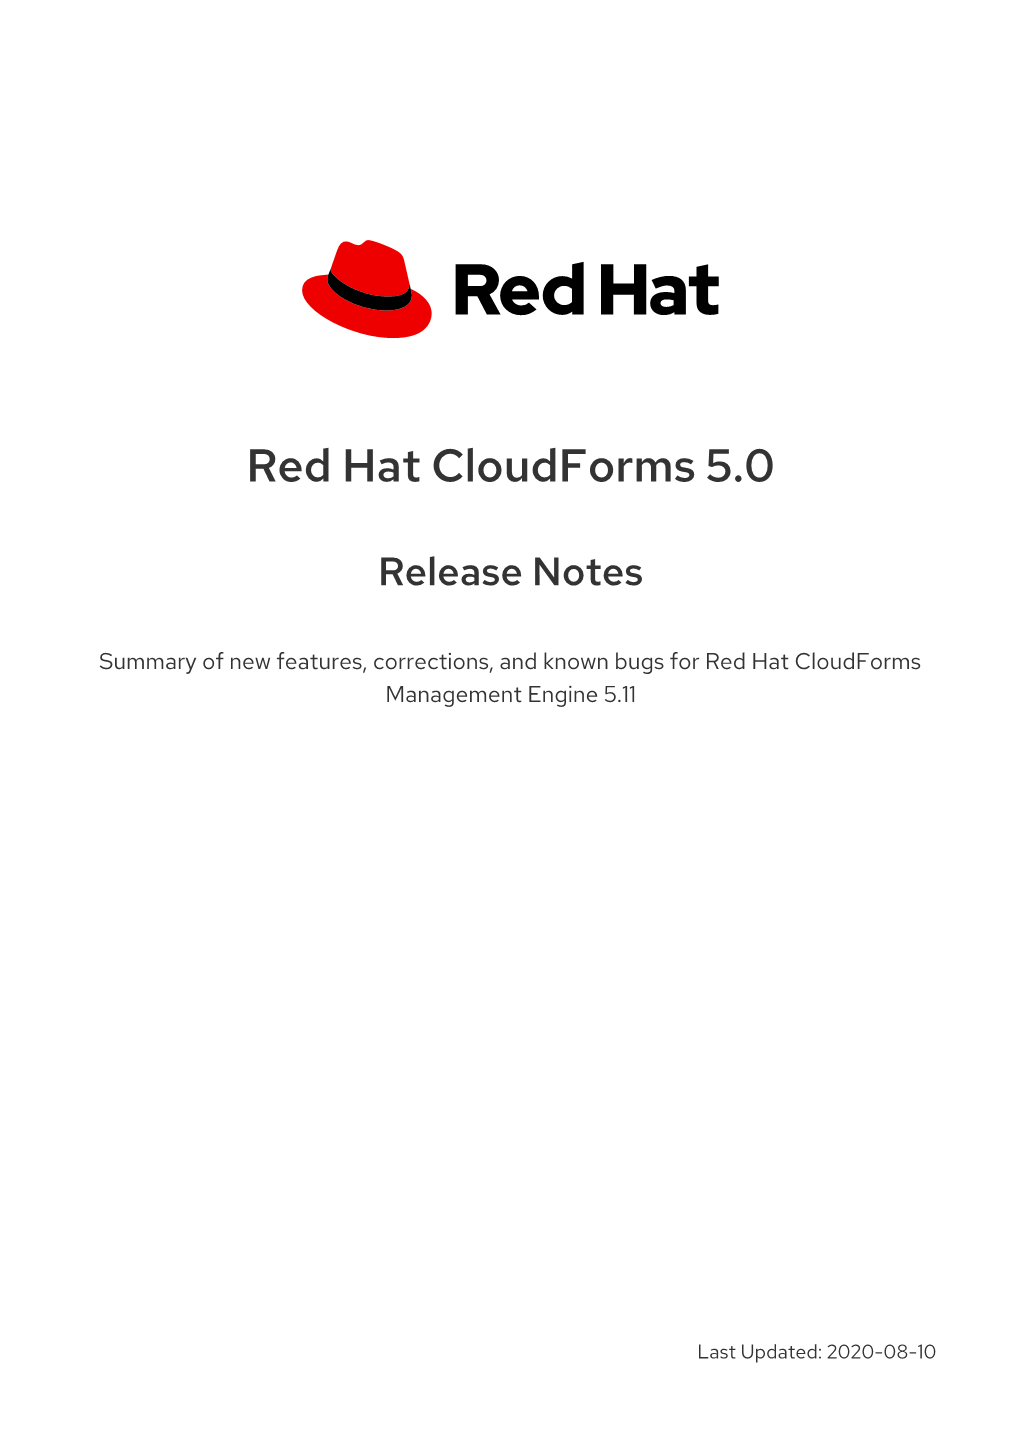 Red Hat Cloudforms 5.0 Release Notes